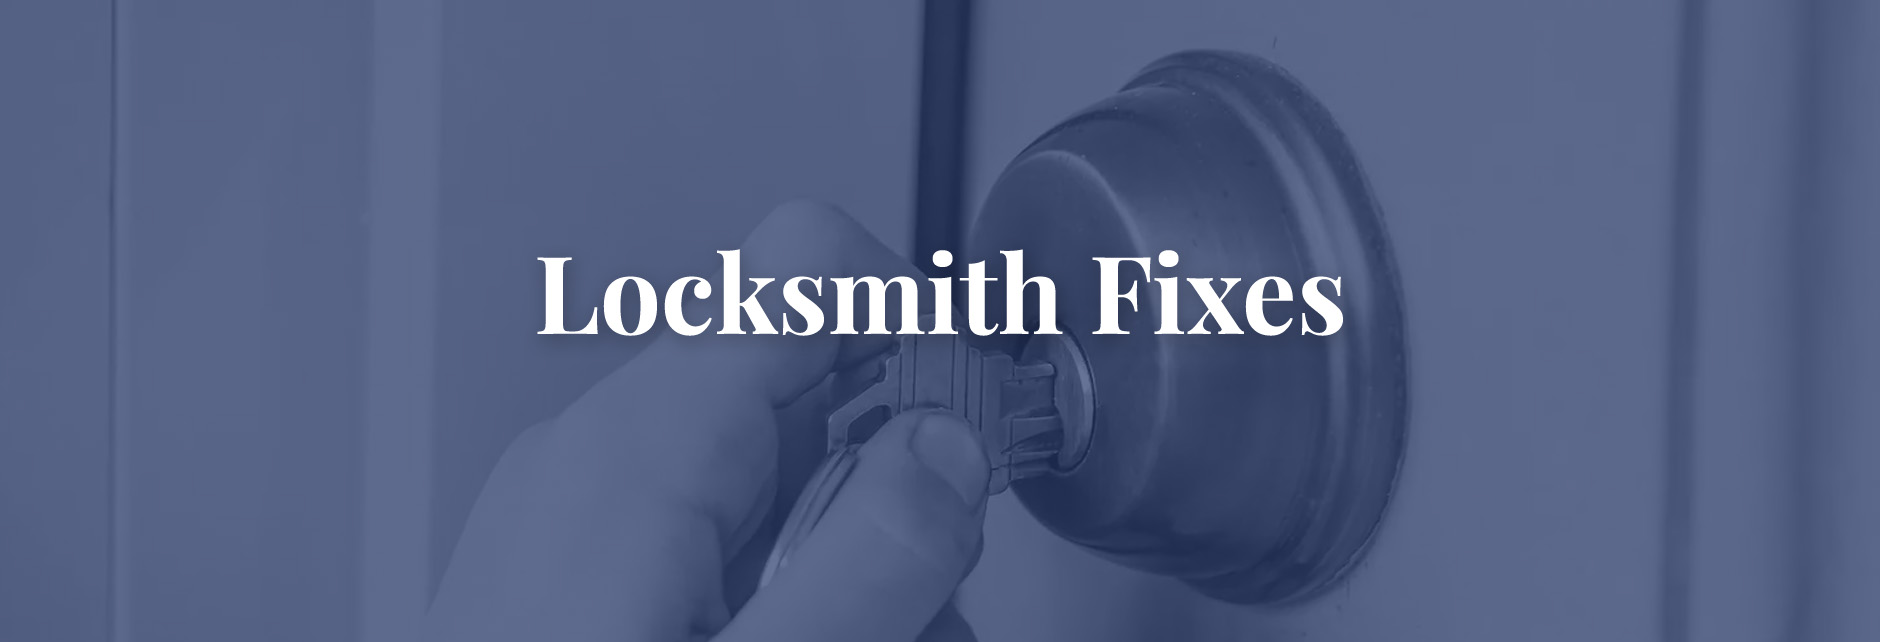 Common Lock Problems And DIY Fixes For Automotive, Residential, And Commercial Locks